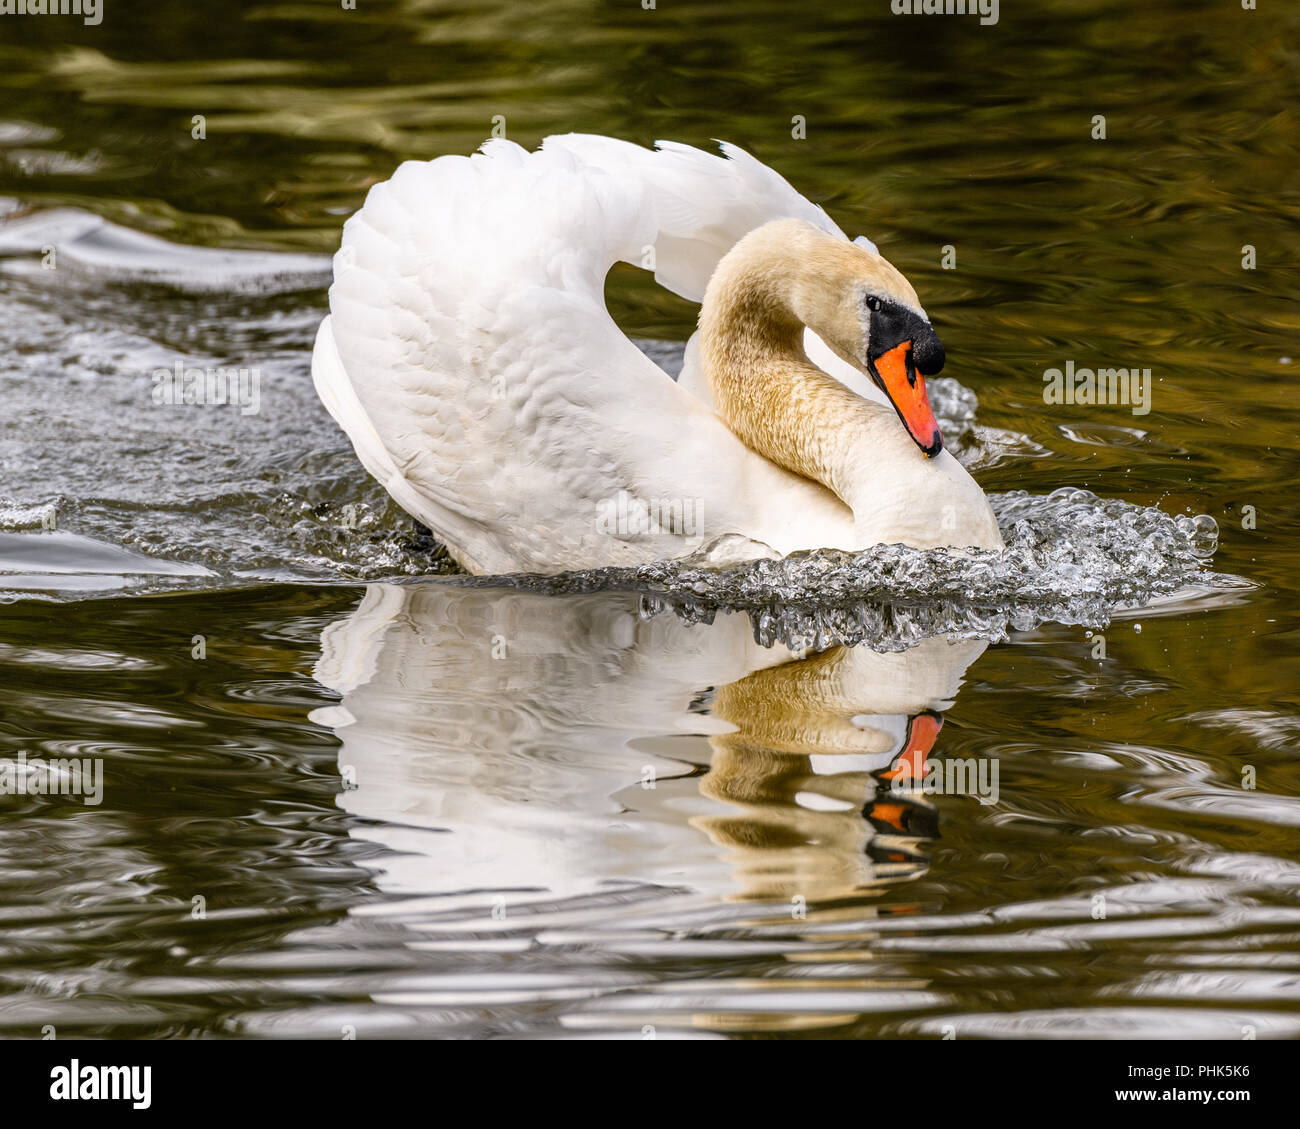 Mute Swan In Attack Mode While Swimming In A Pond Stock Photo